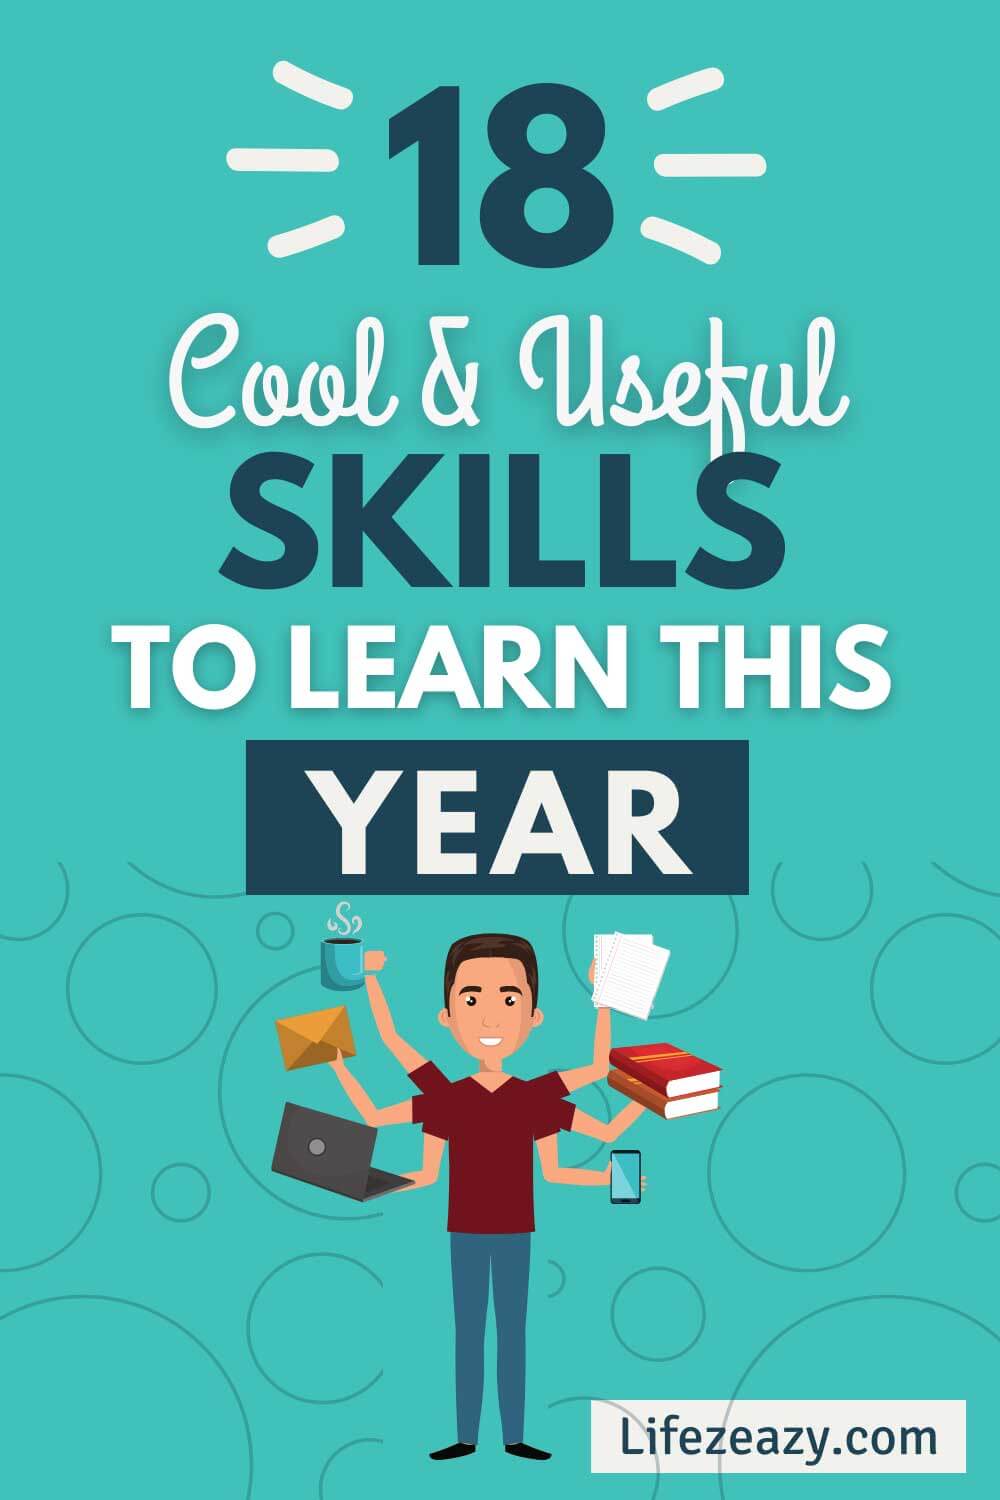 Skills to learn